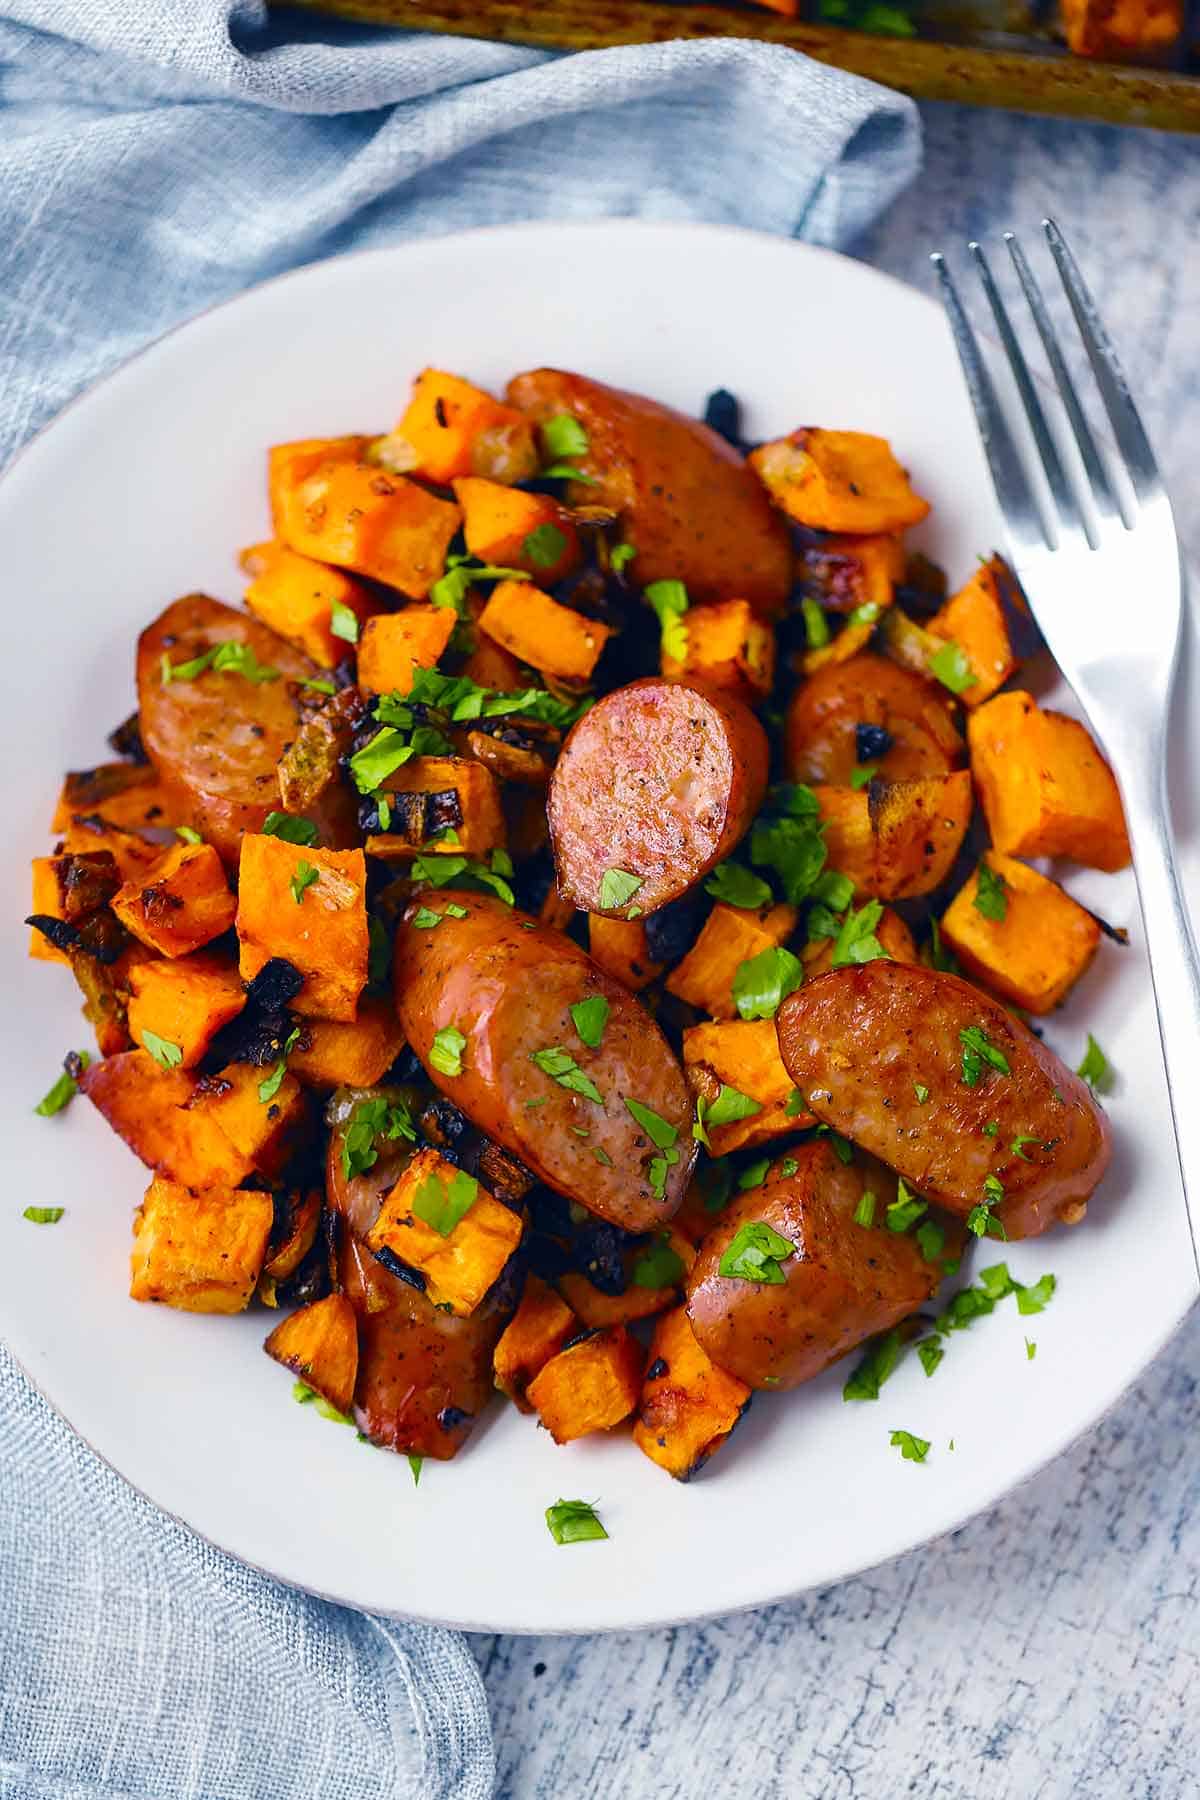 Sausage and sweet potatoes on a white plate.